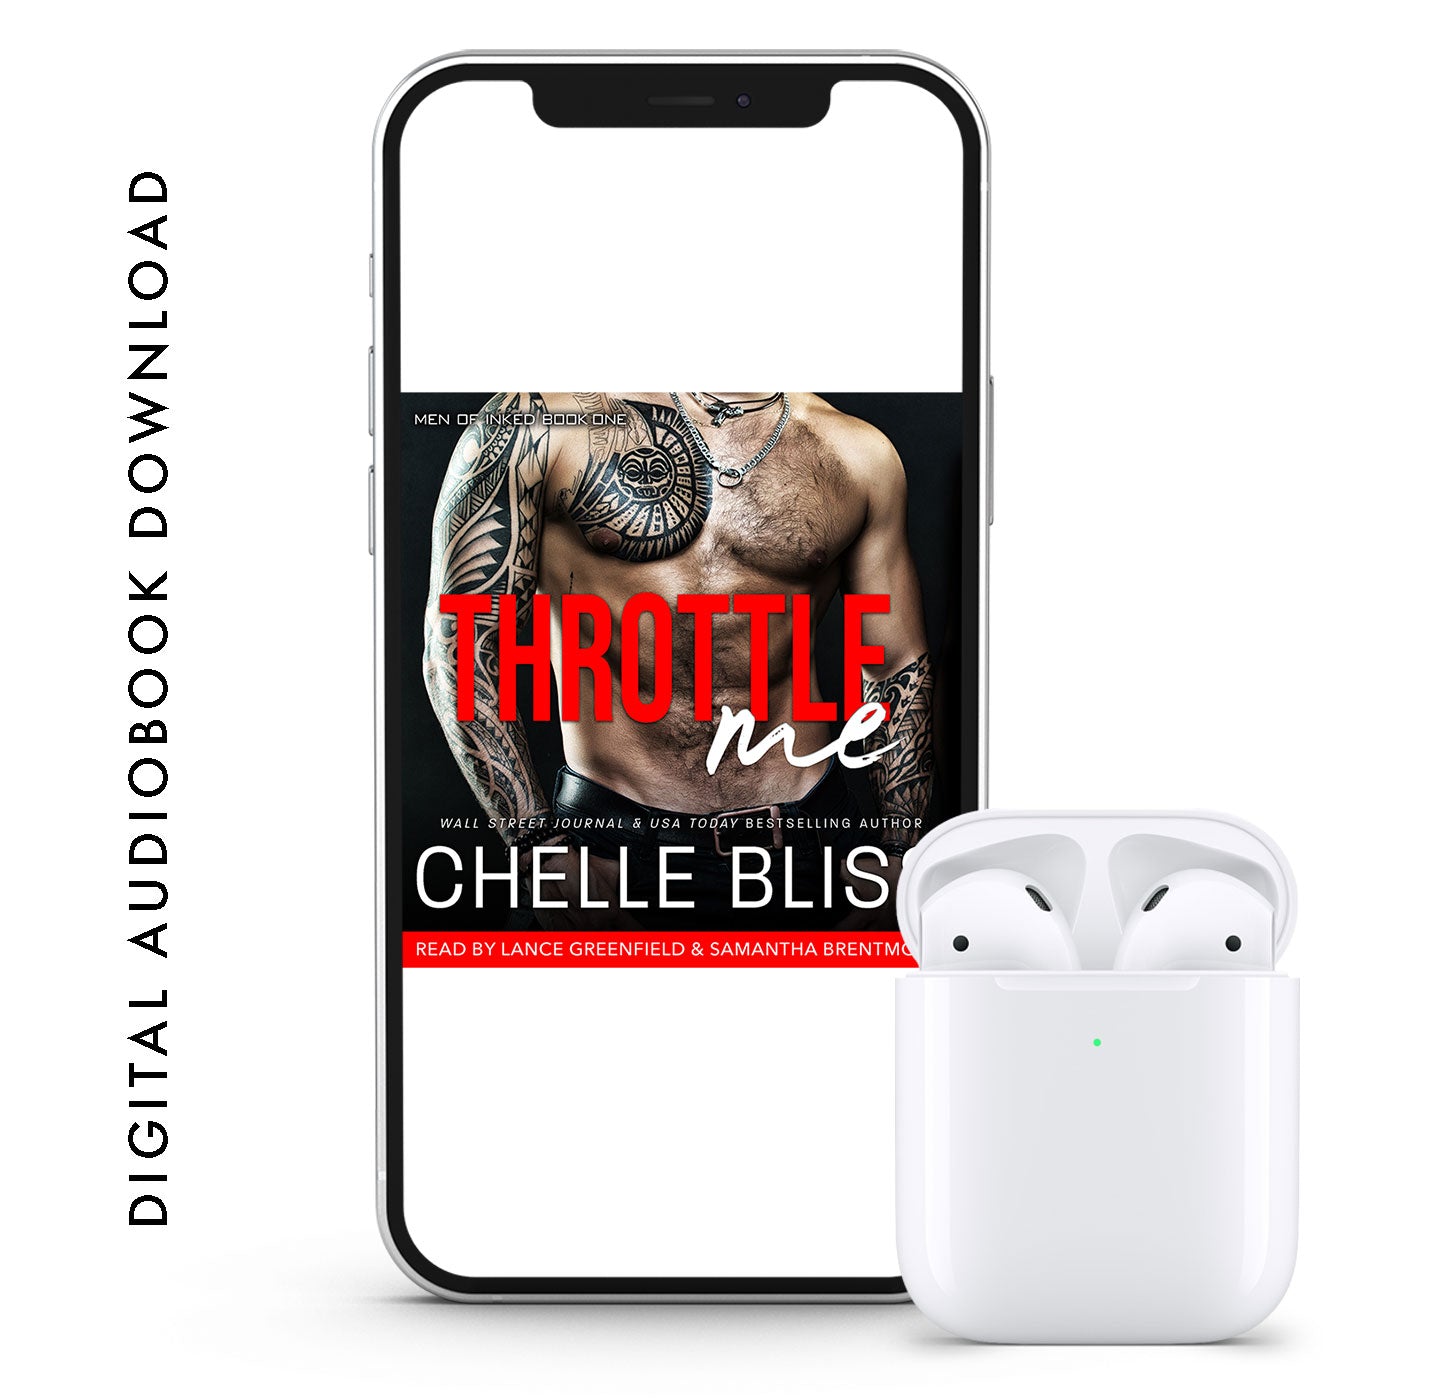 throttle me audiobook by chelle bliss shirtless tattooed man 